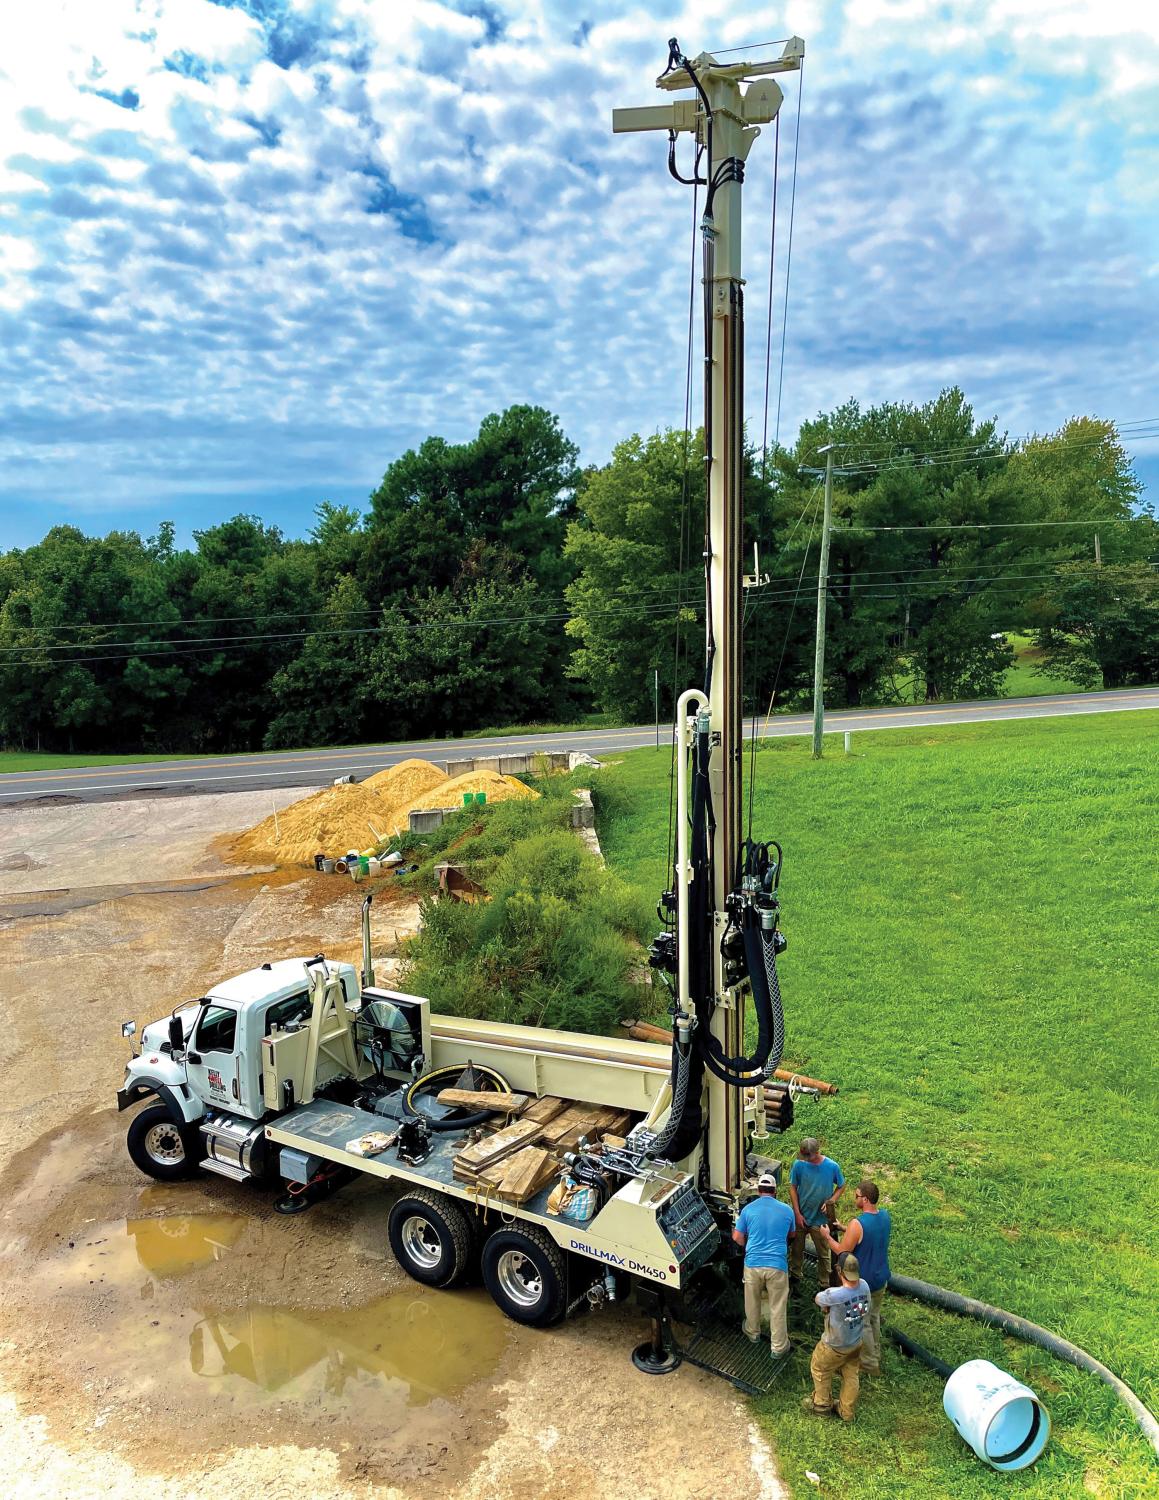 Adding DM450 drill rig models doubles customer service offerings. Photo by: Nathan Rials